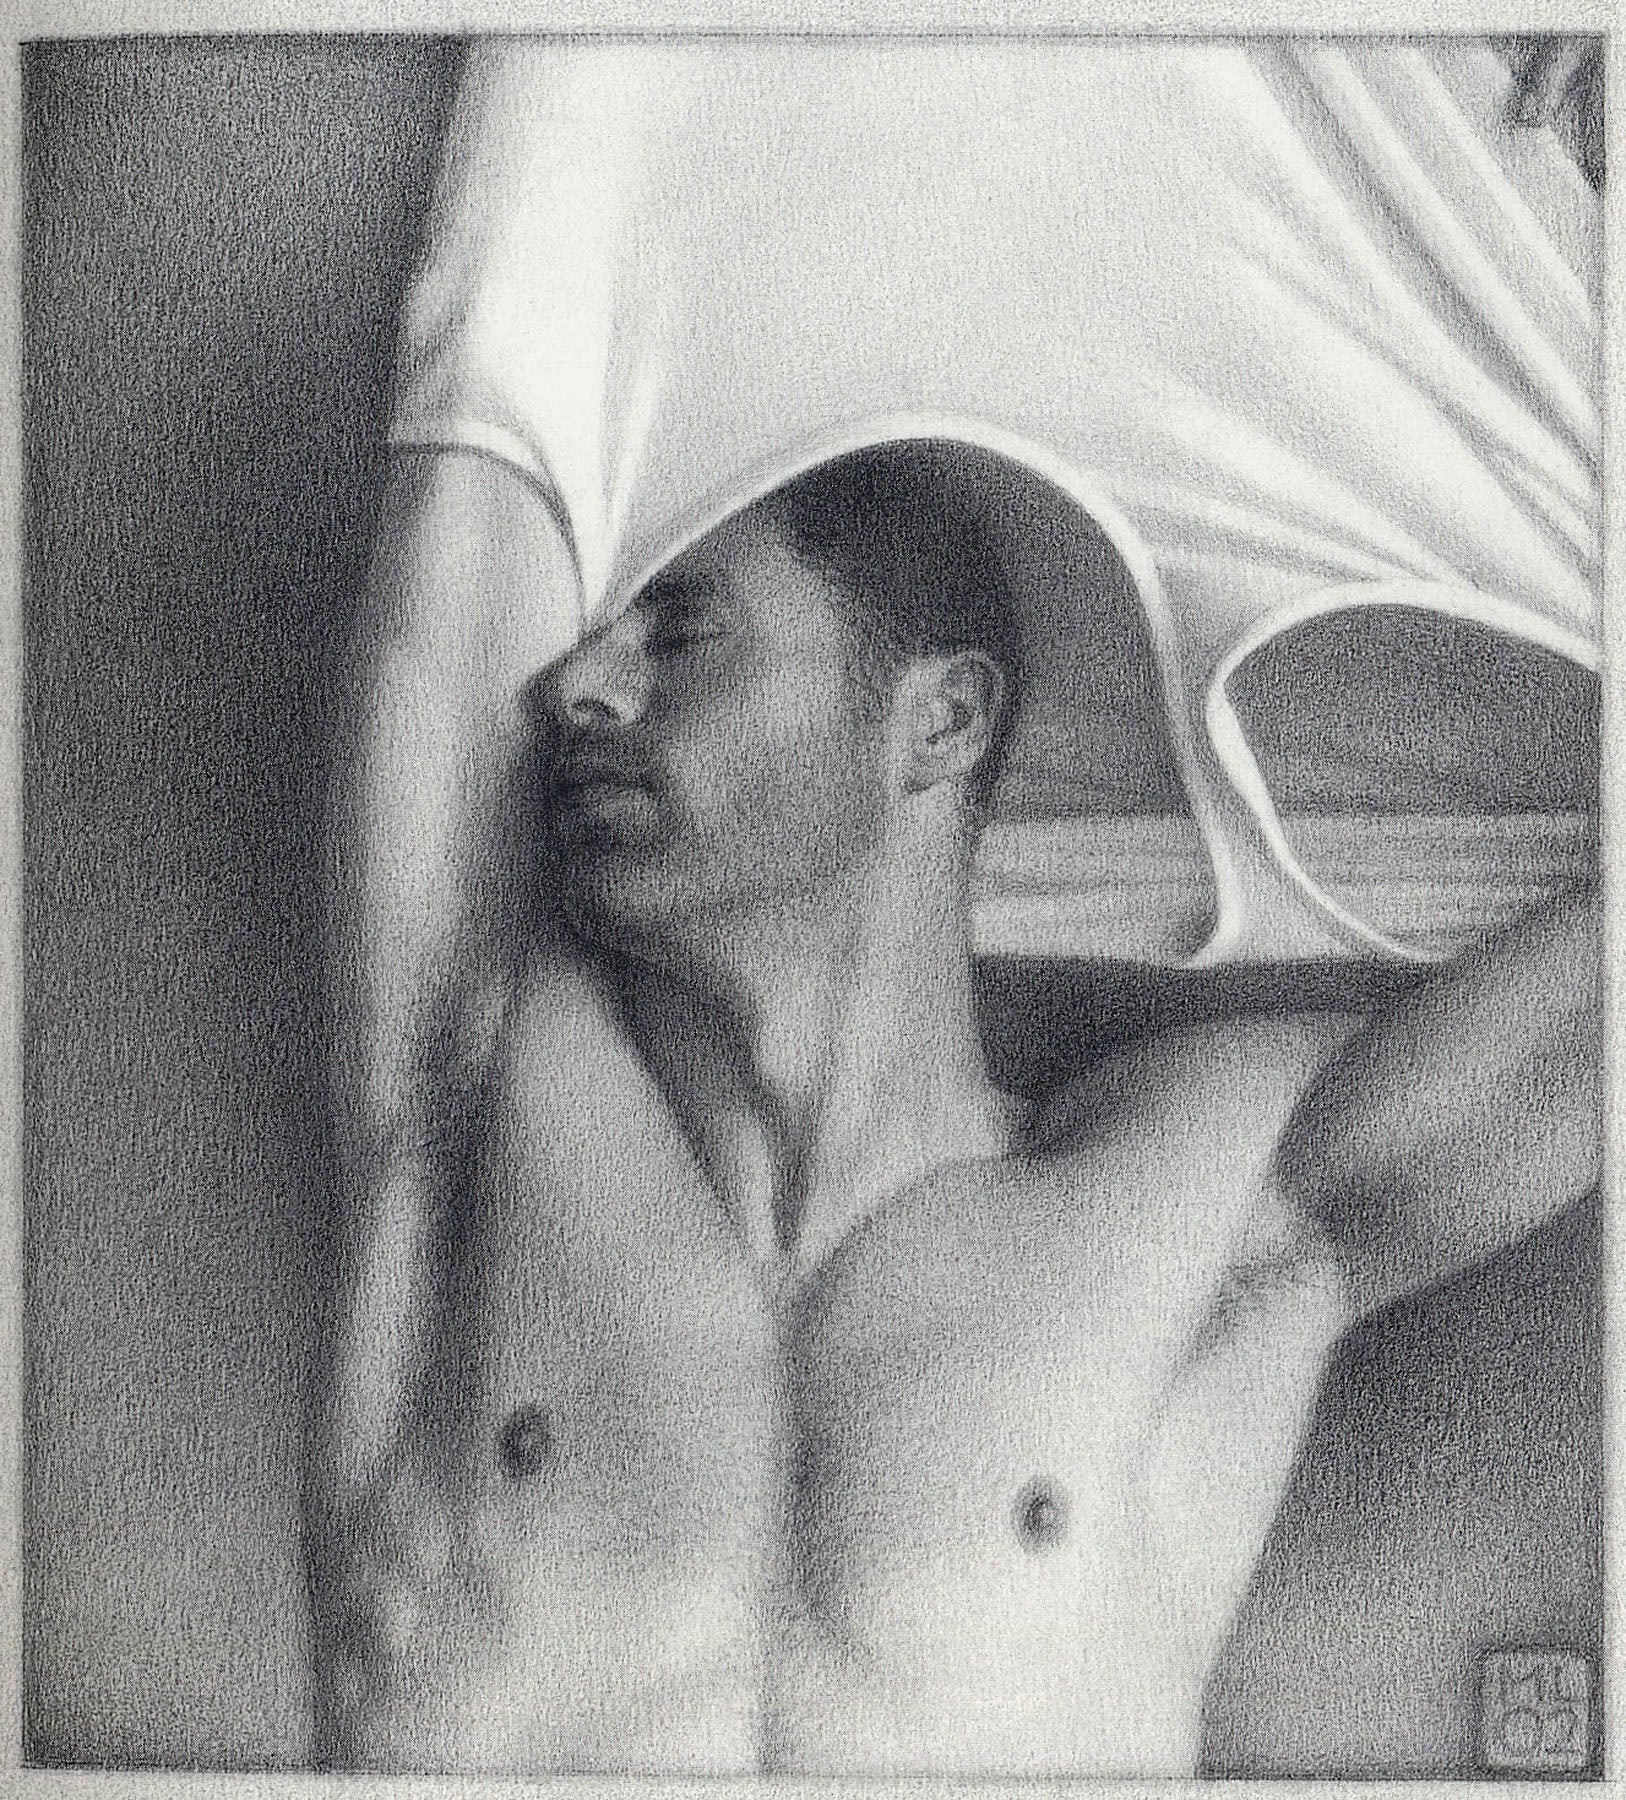 Michael Leonard, Taking Off II (SOLD), 2002, graphite pencil on paper, 8 1/2 x 7 3/4 inches